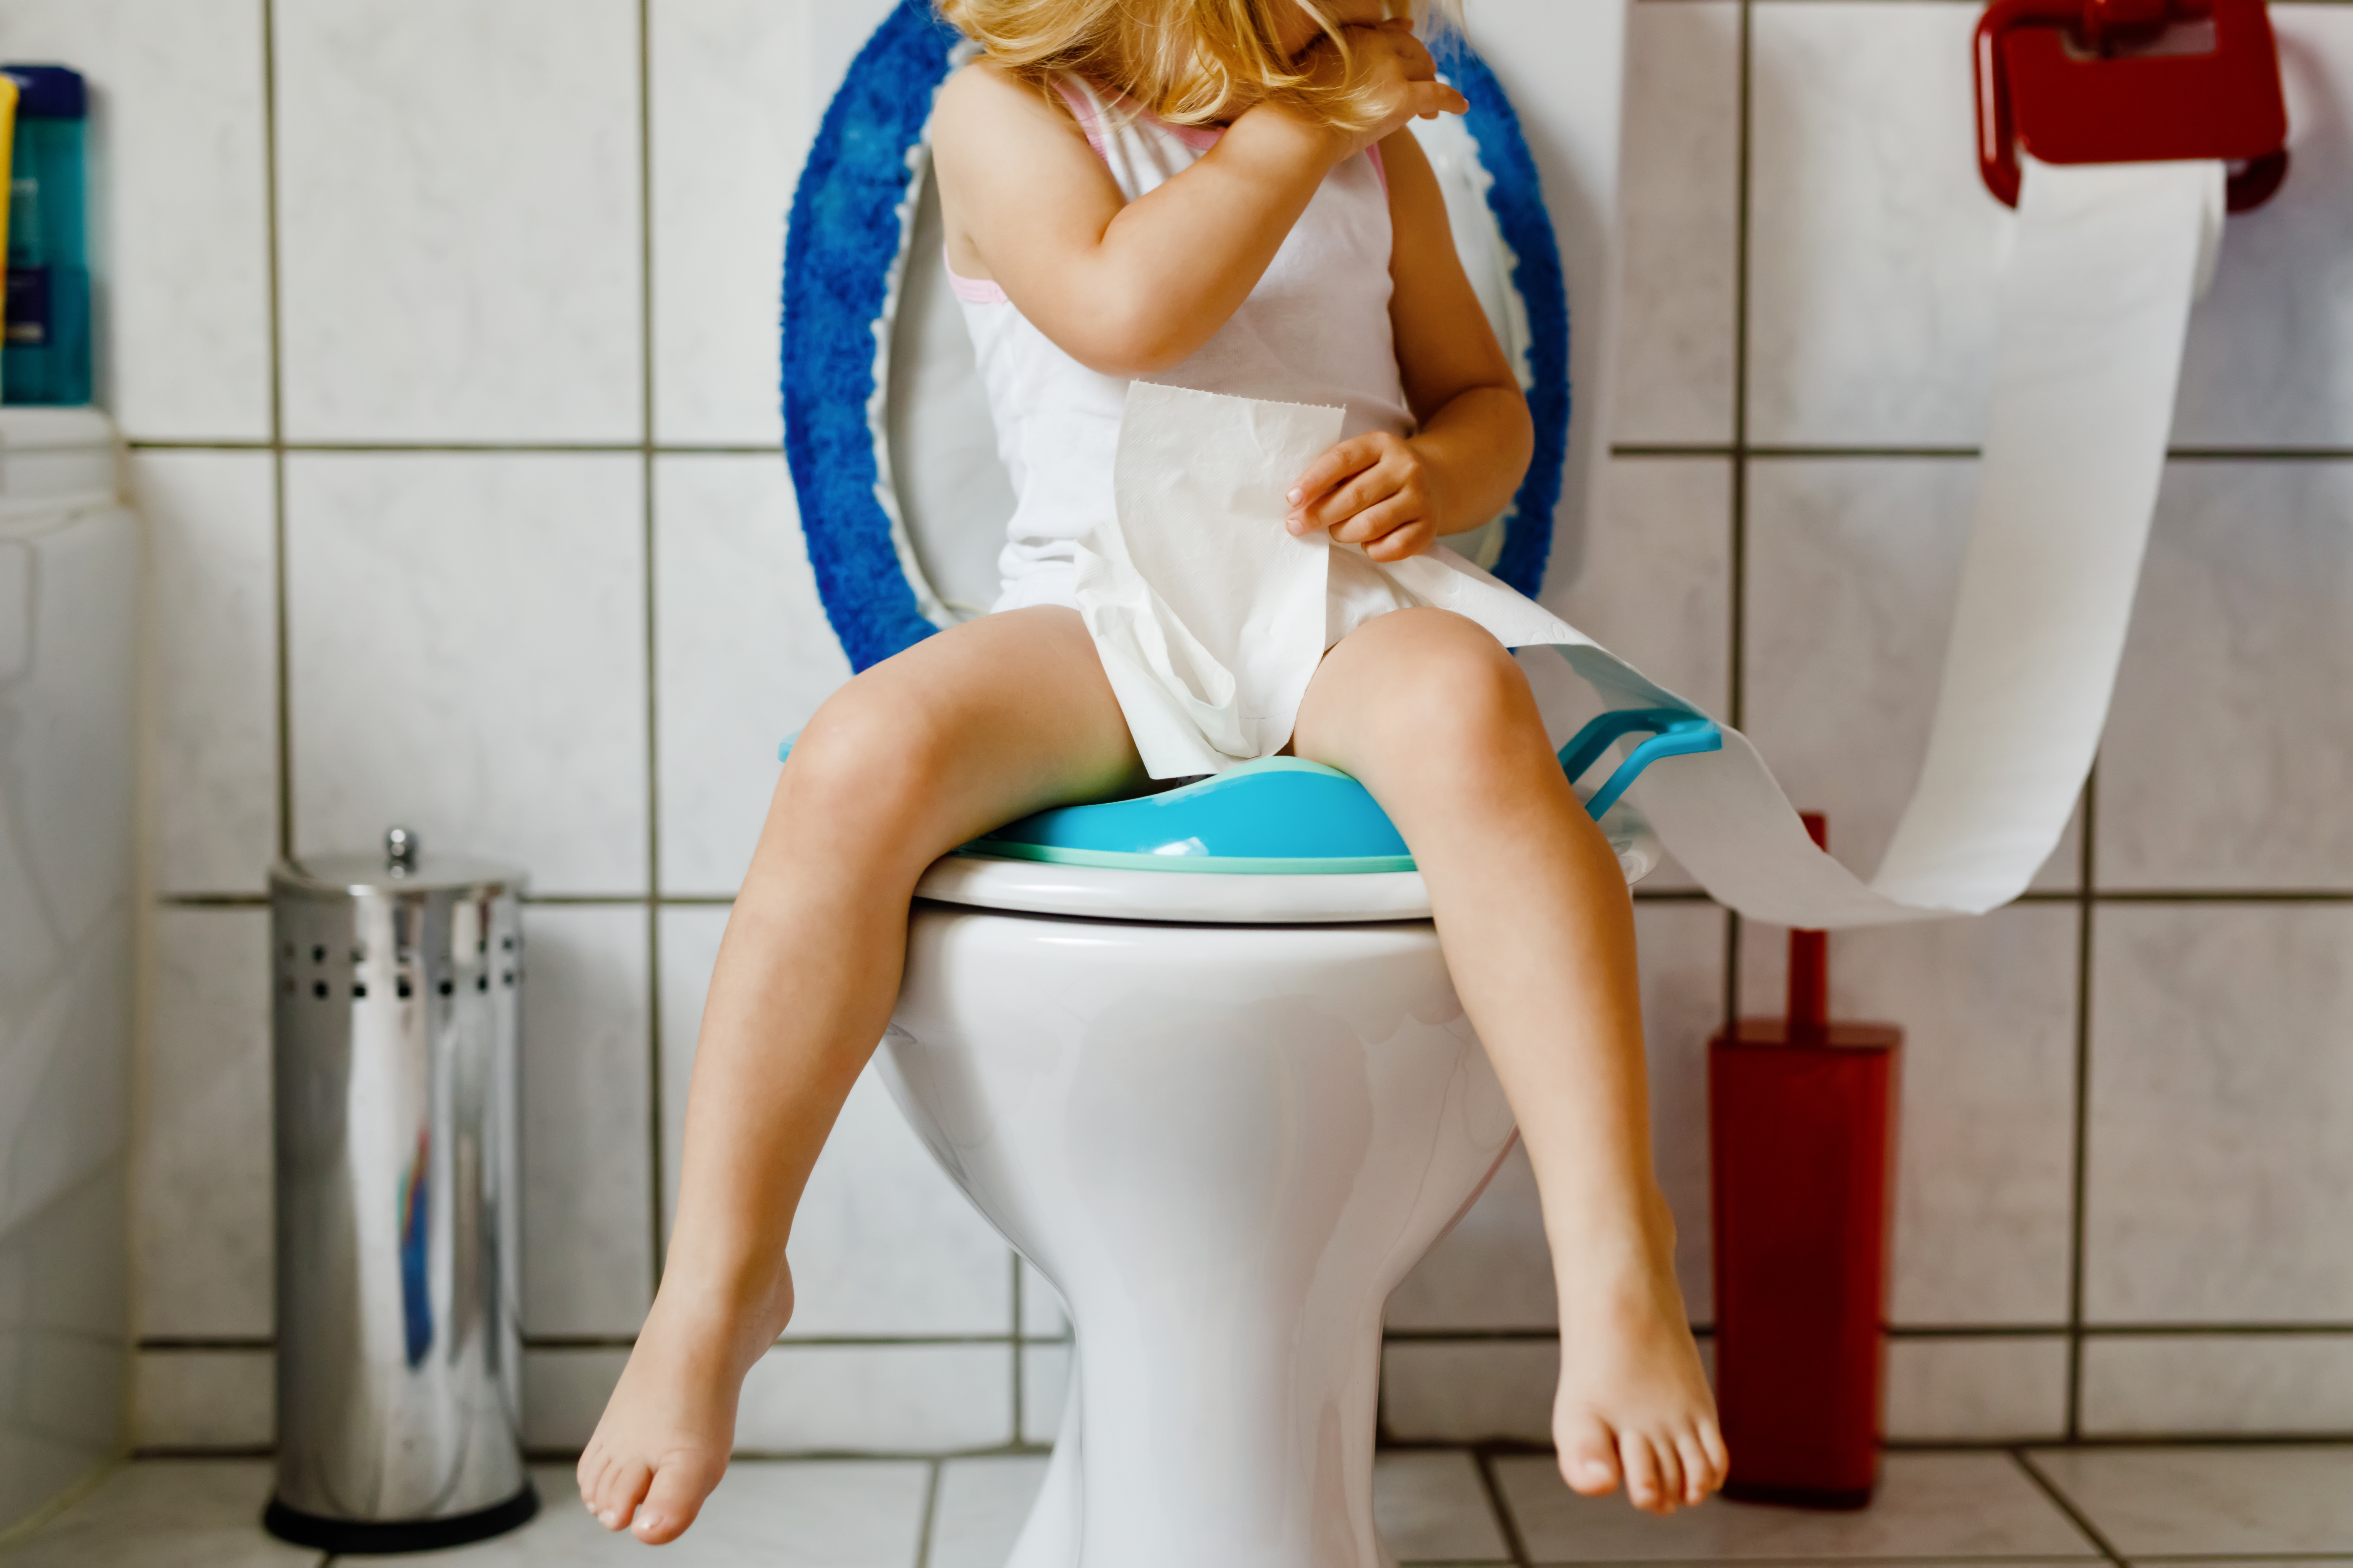 when to be concerned about frequent urination